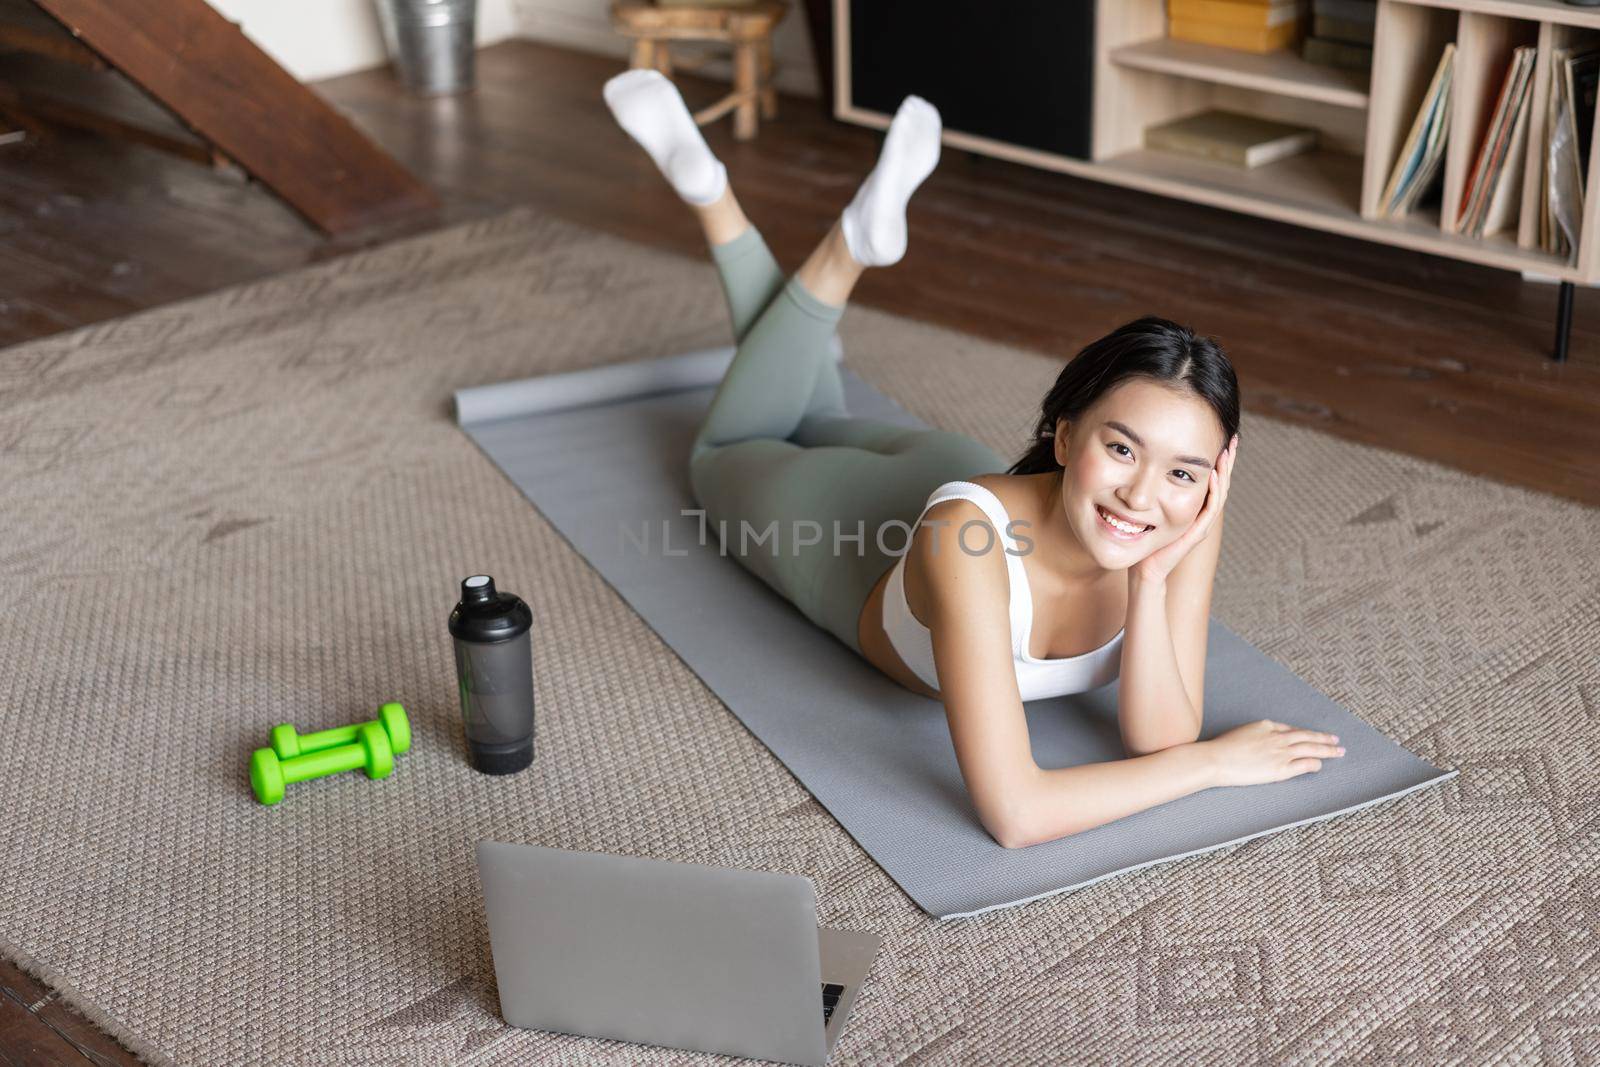 Asian fitness girl having break from workout, exercising at home on floor mat with dumbells and protein shaker bottle, smiling at camera.